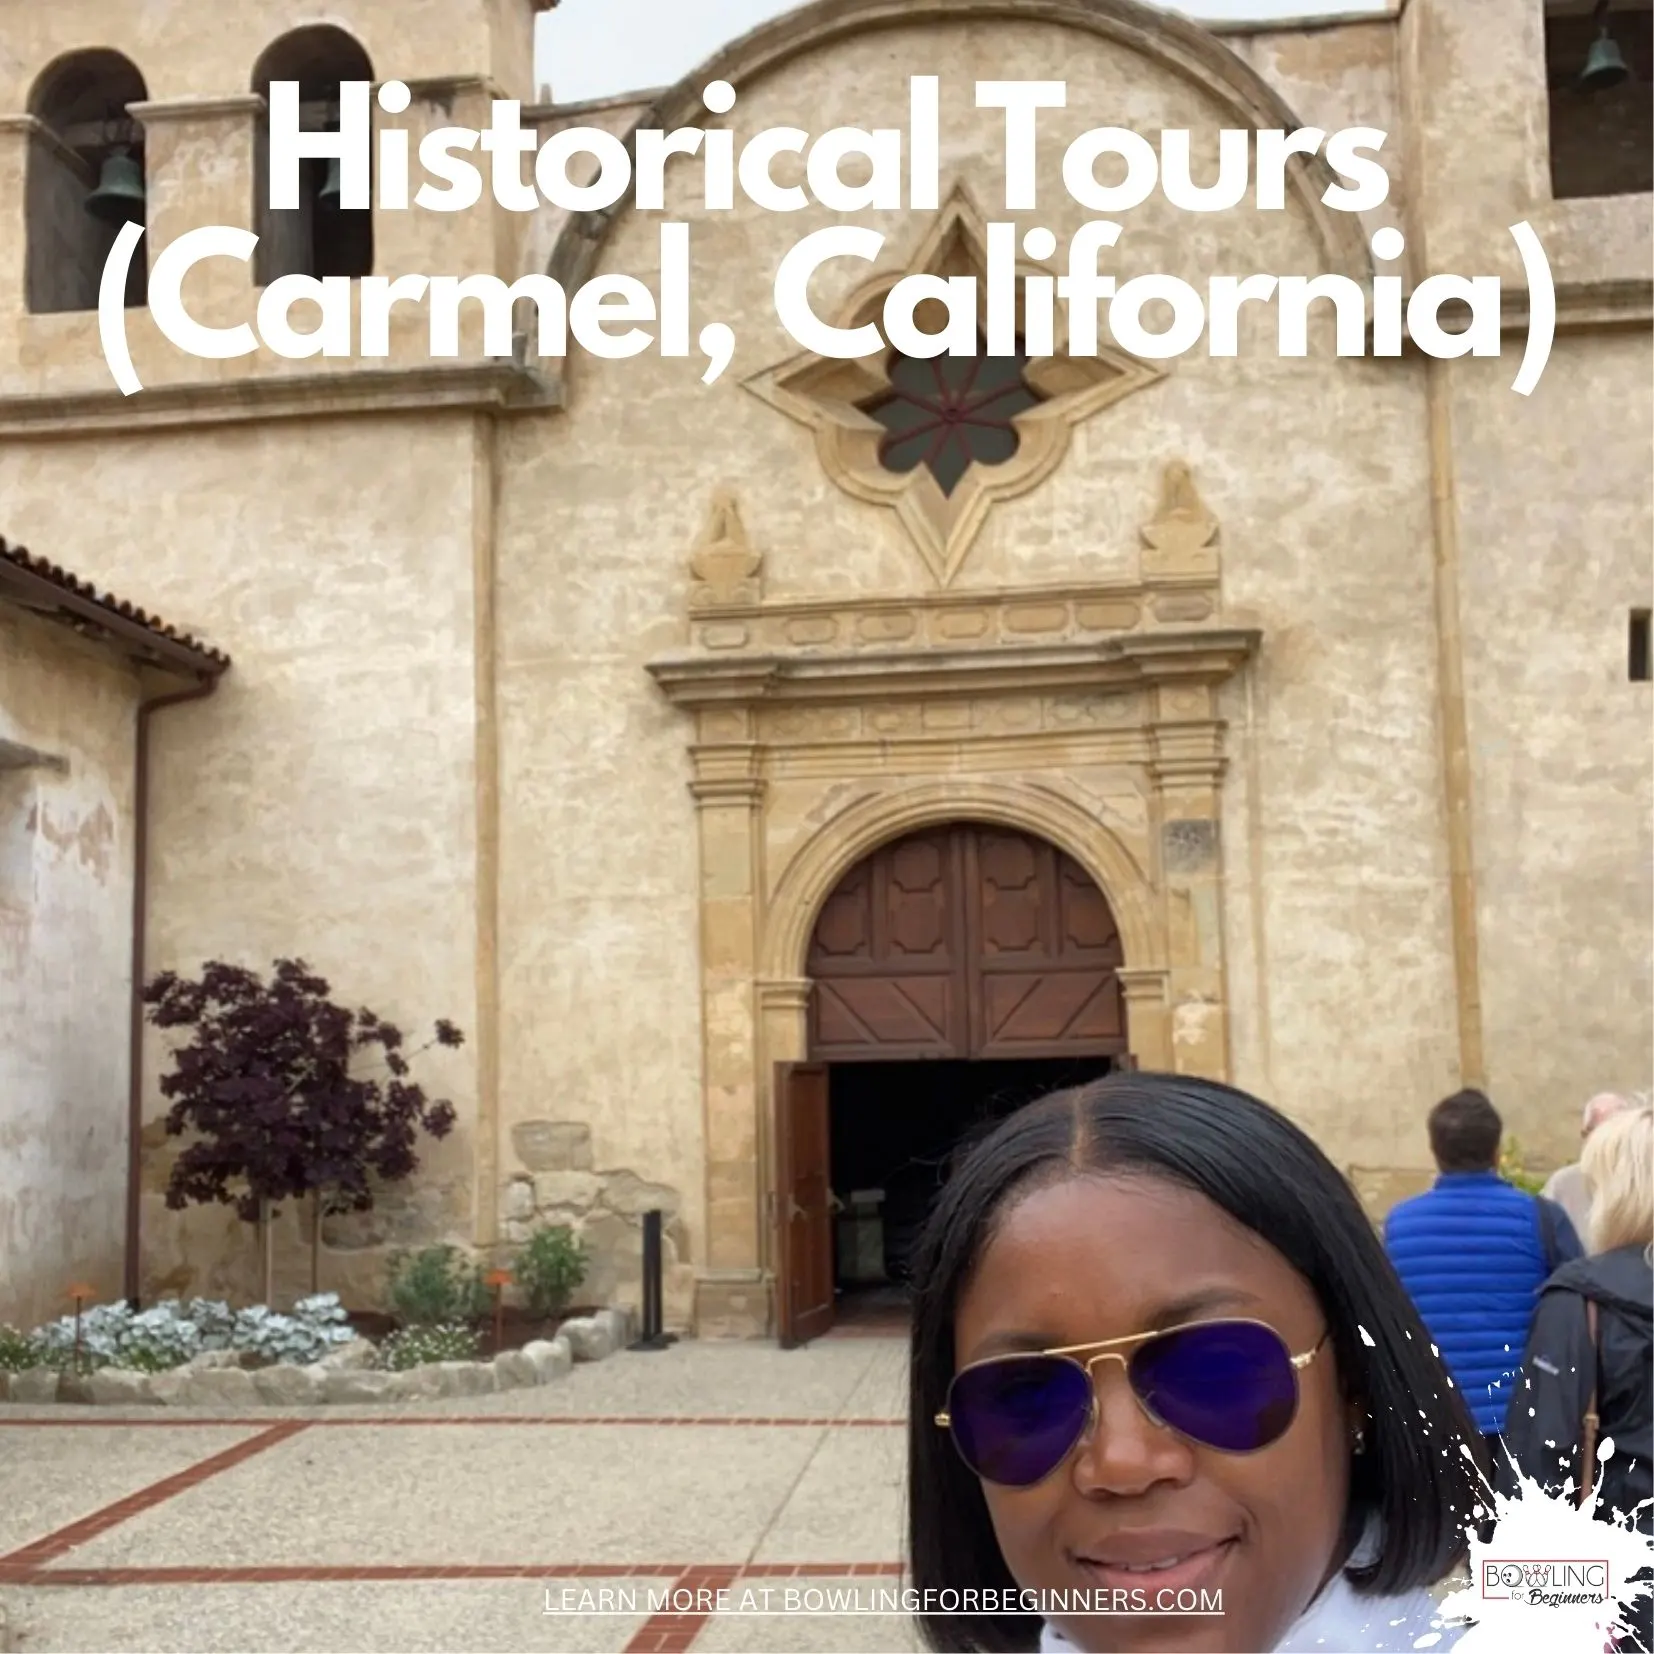 Woman taking selfie in front of historical carmel mission wearing a white jacket